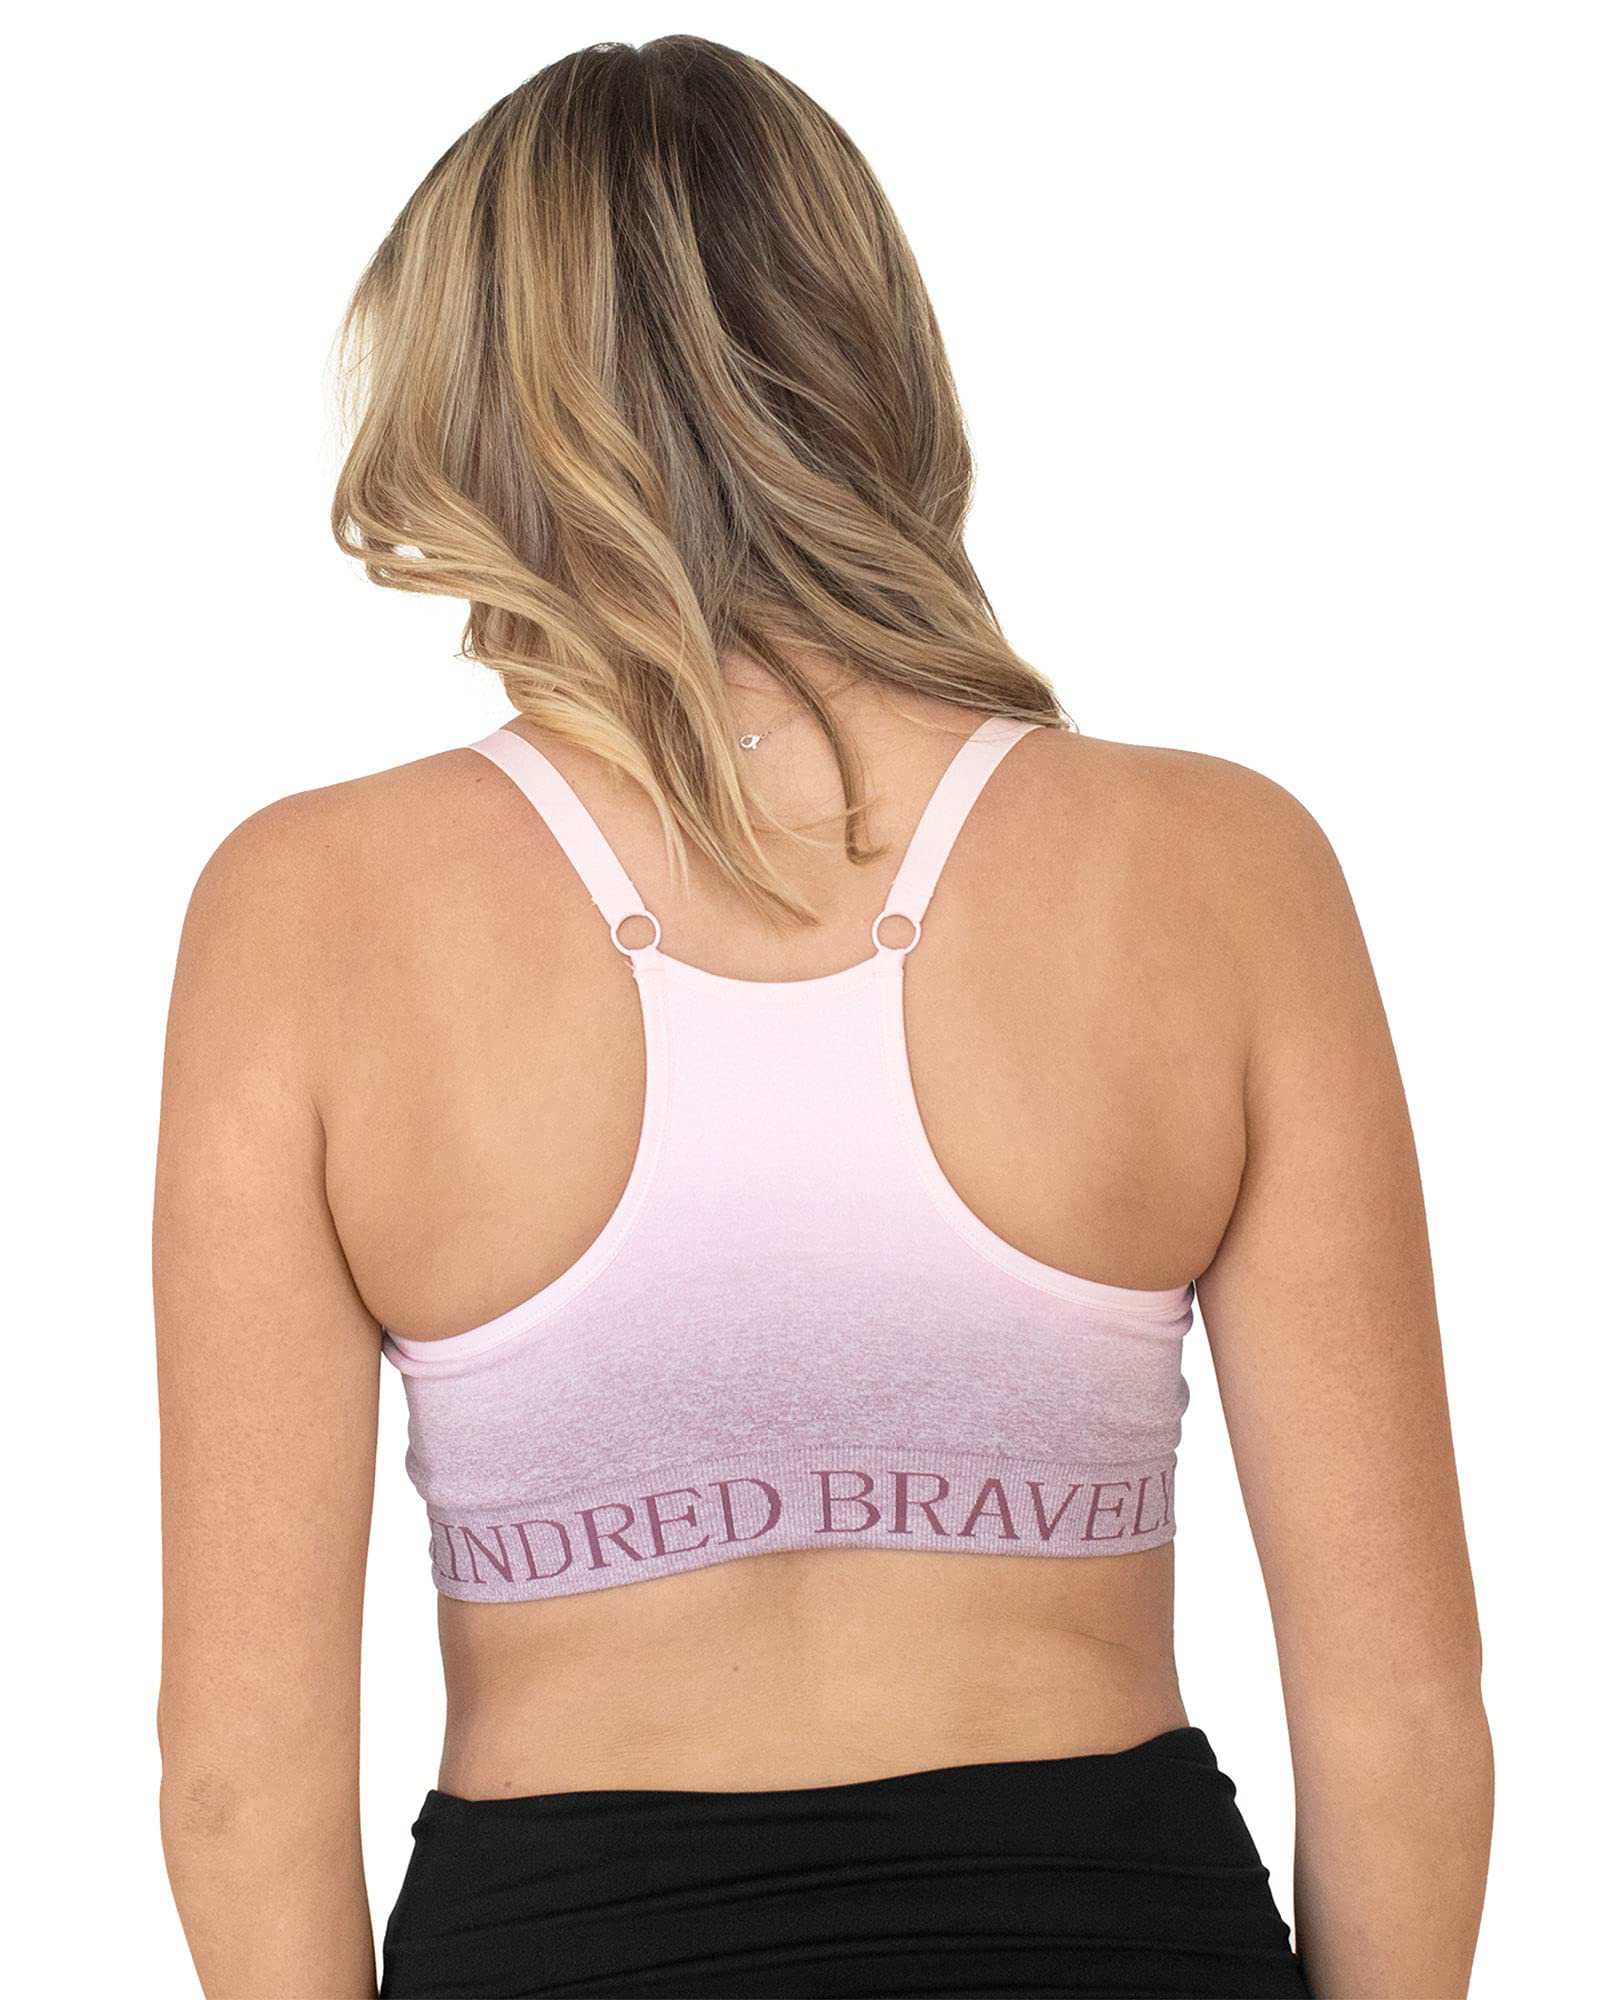 Kindred Bravely Hands Free Pumping Sports Bra (Ombre Purple, Small) & Organic Washable Breast Pads Bundle